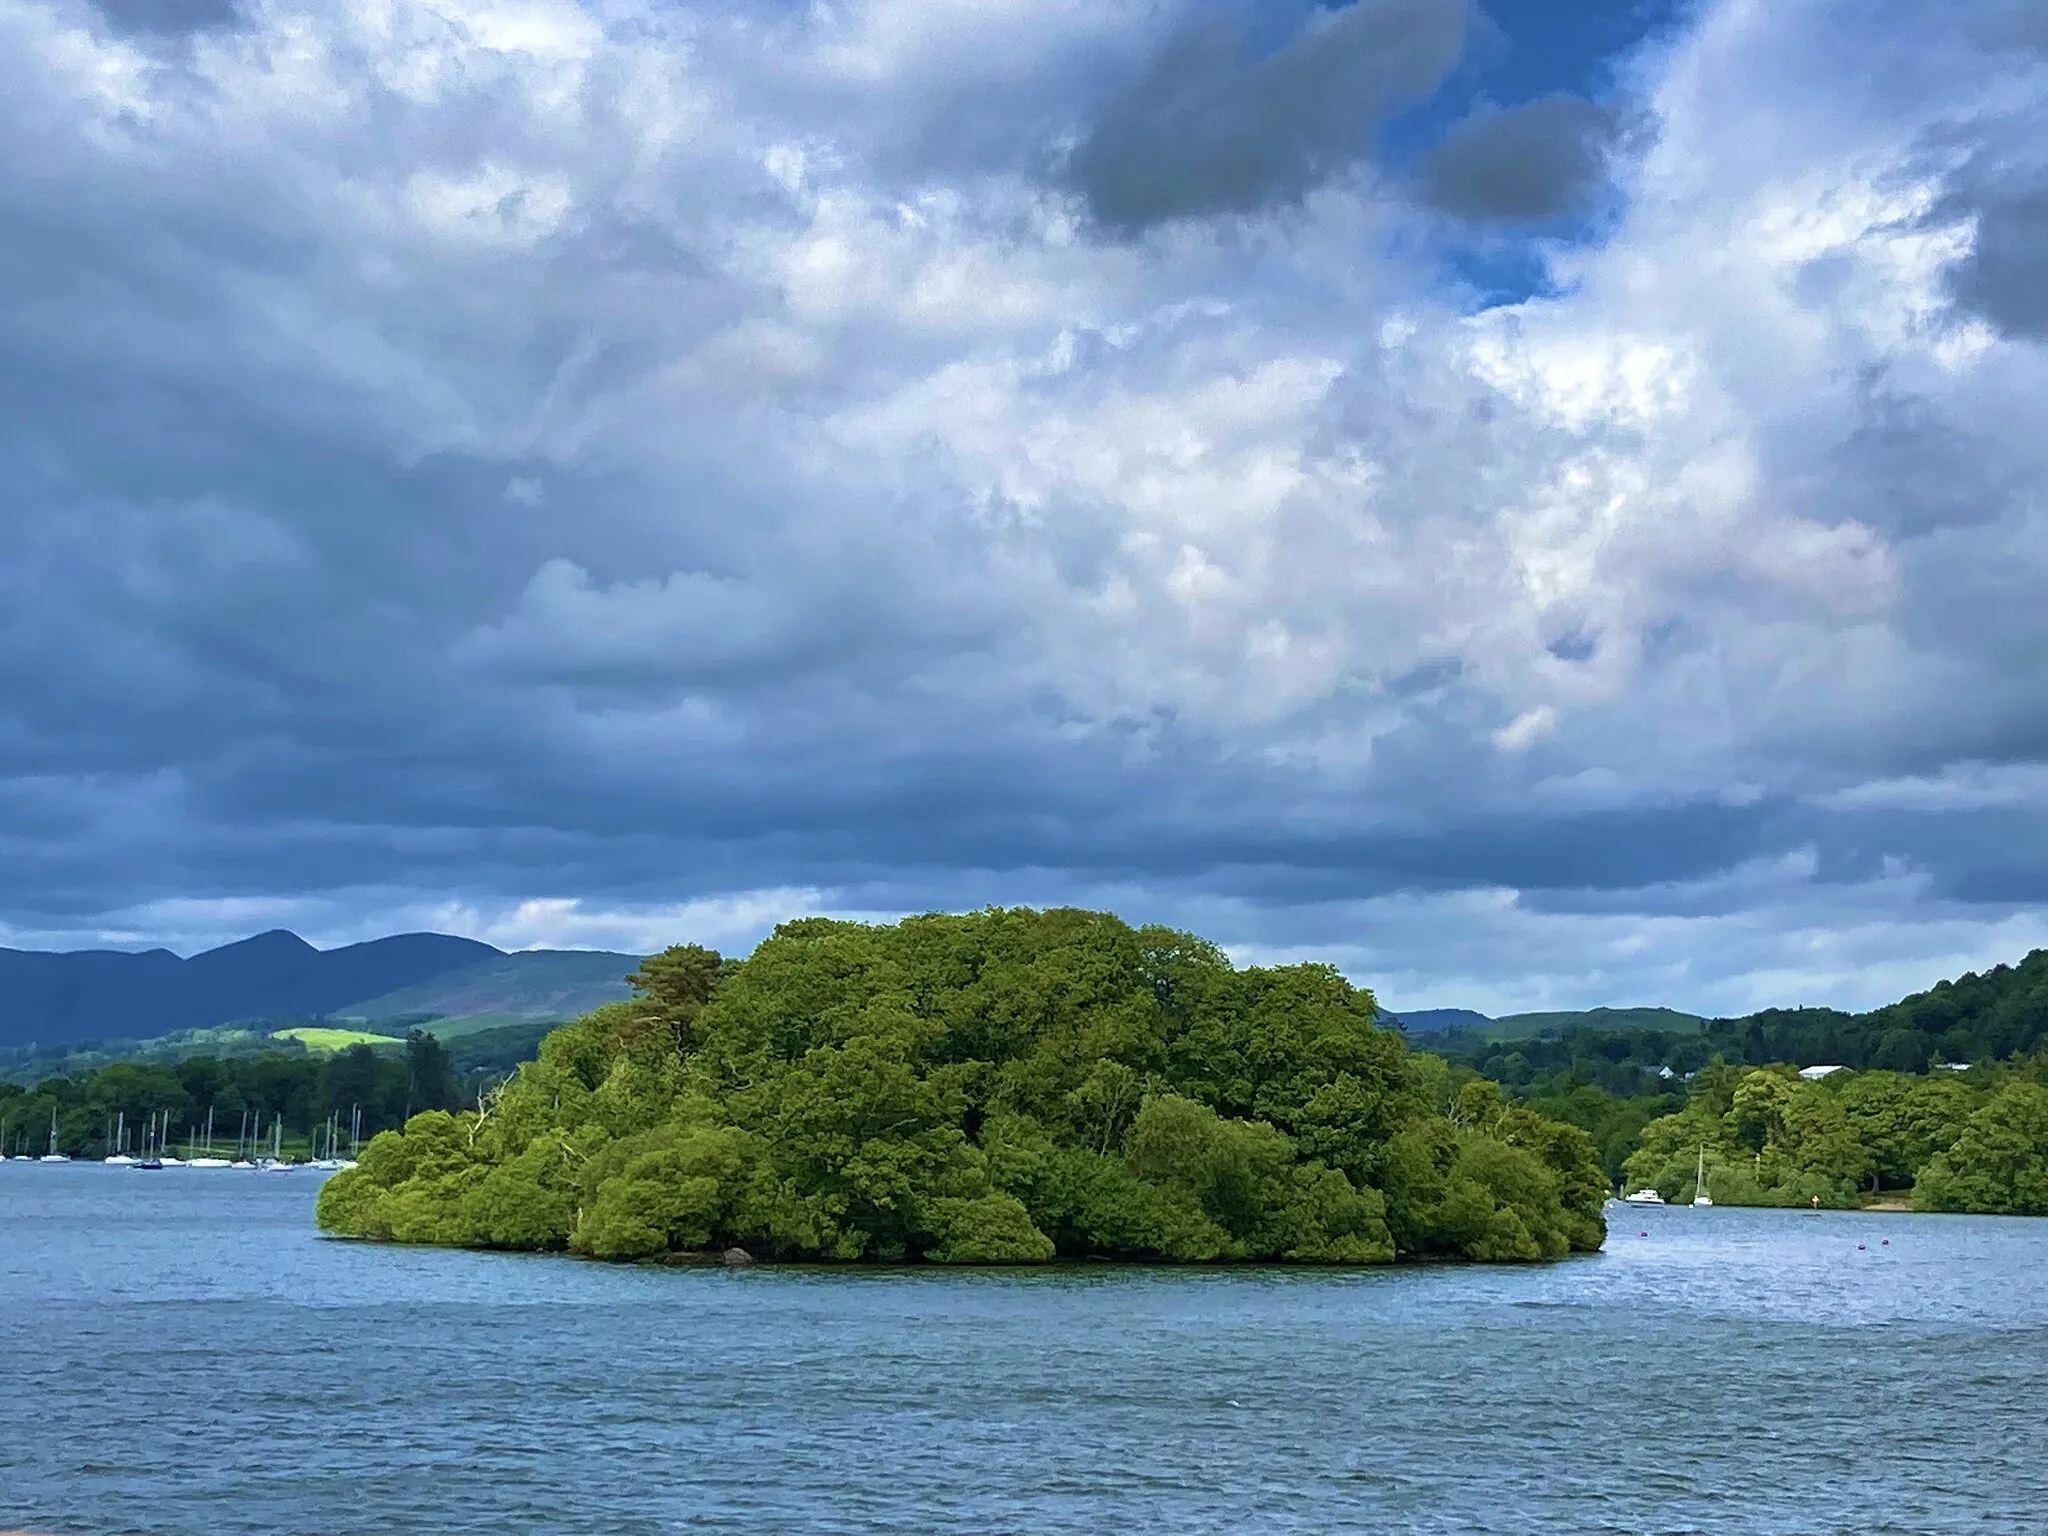 Photo showing: Ramp Holme is one of several islands on Windermere, the largest lake in England. This photograph was taken from a boat on the lake.